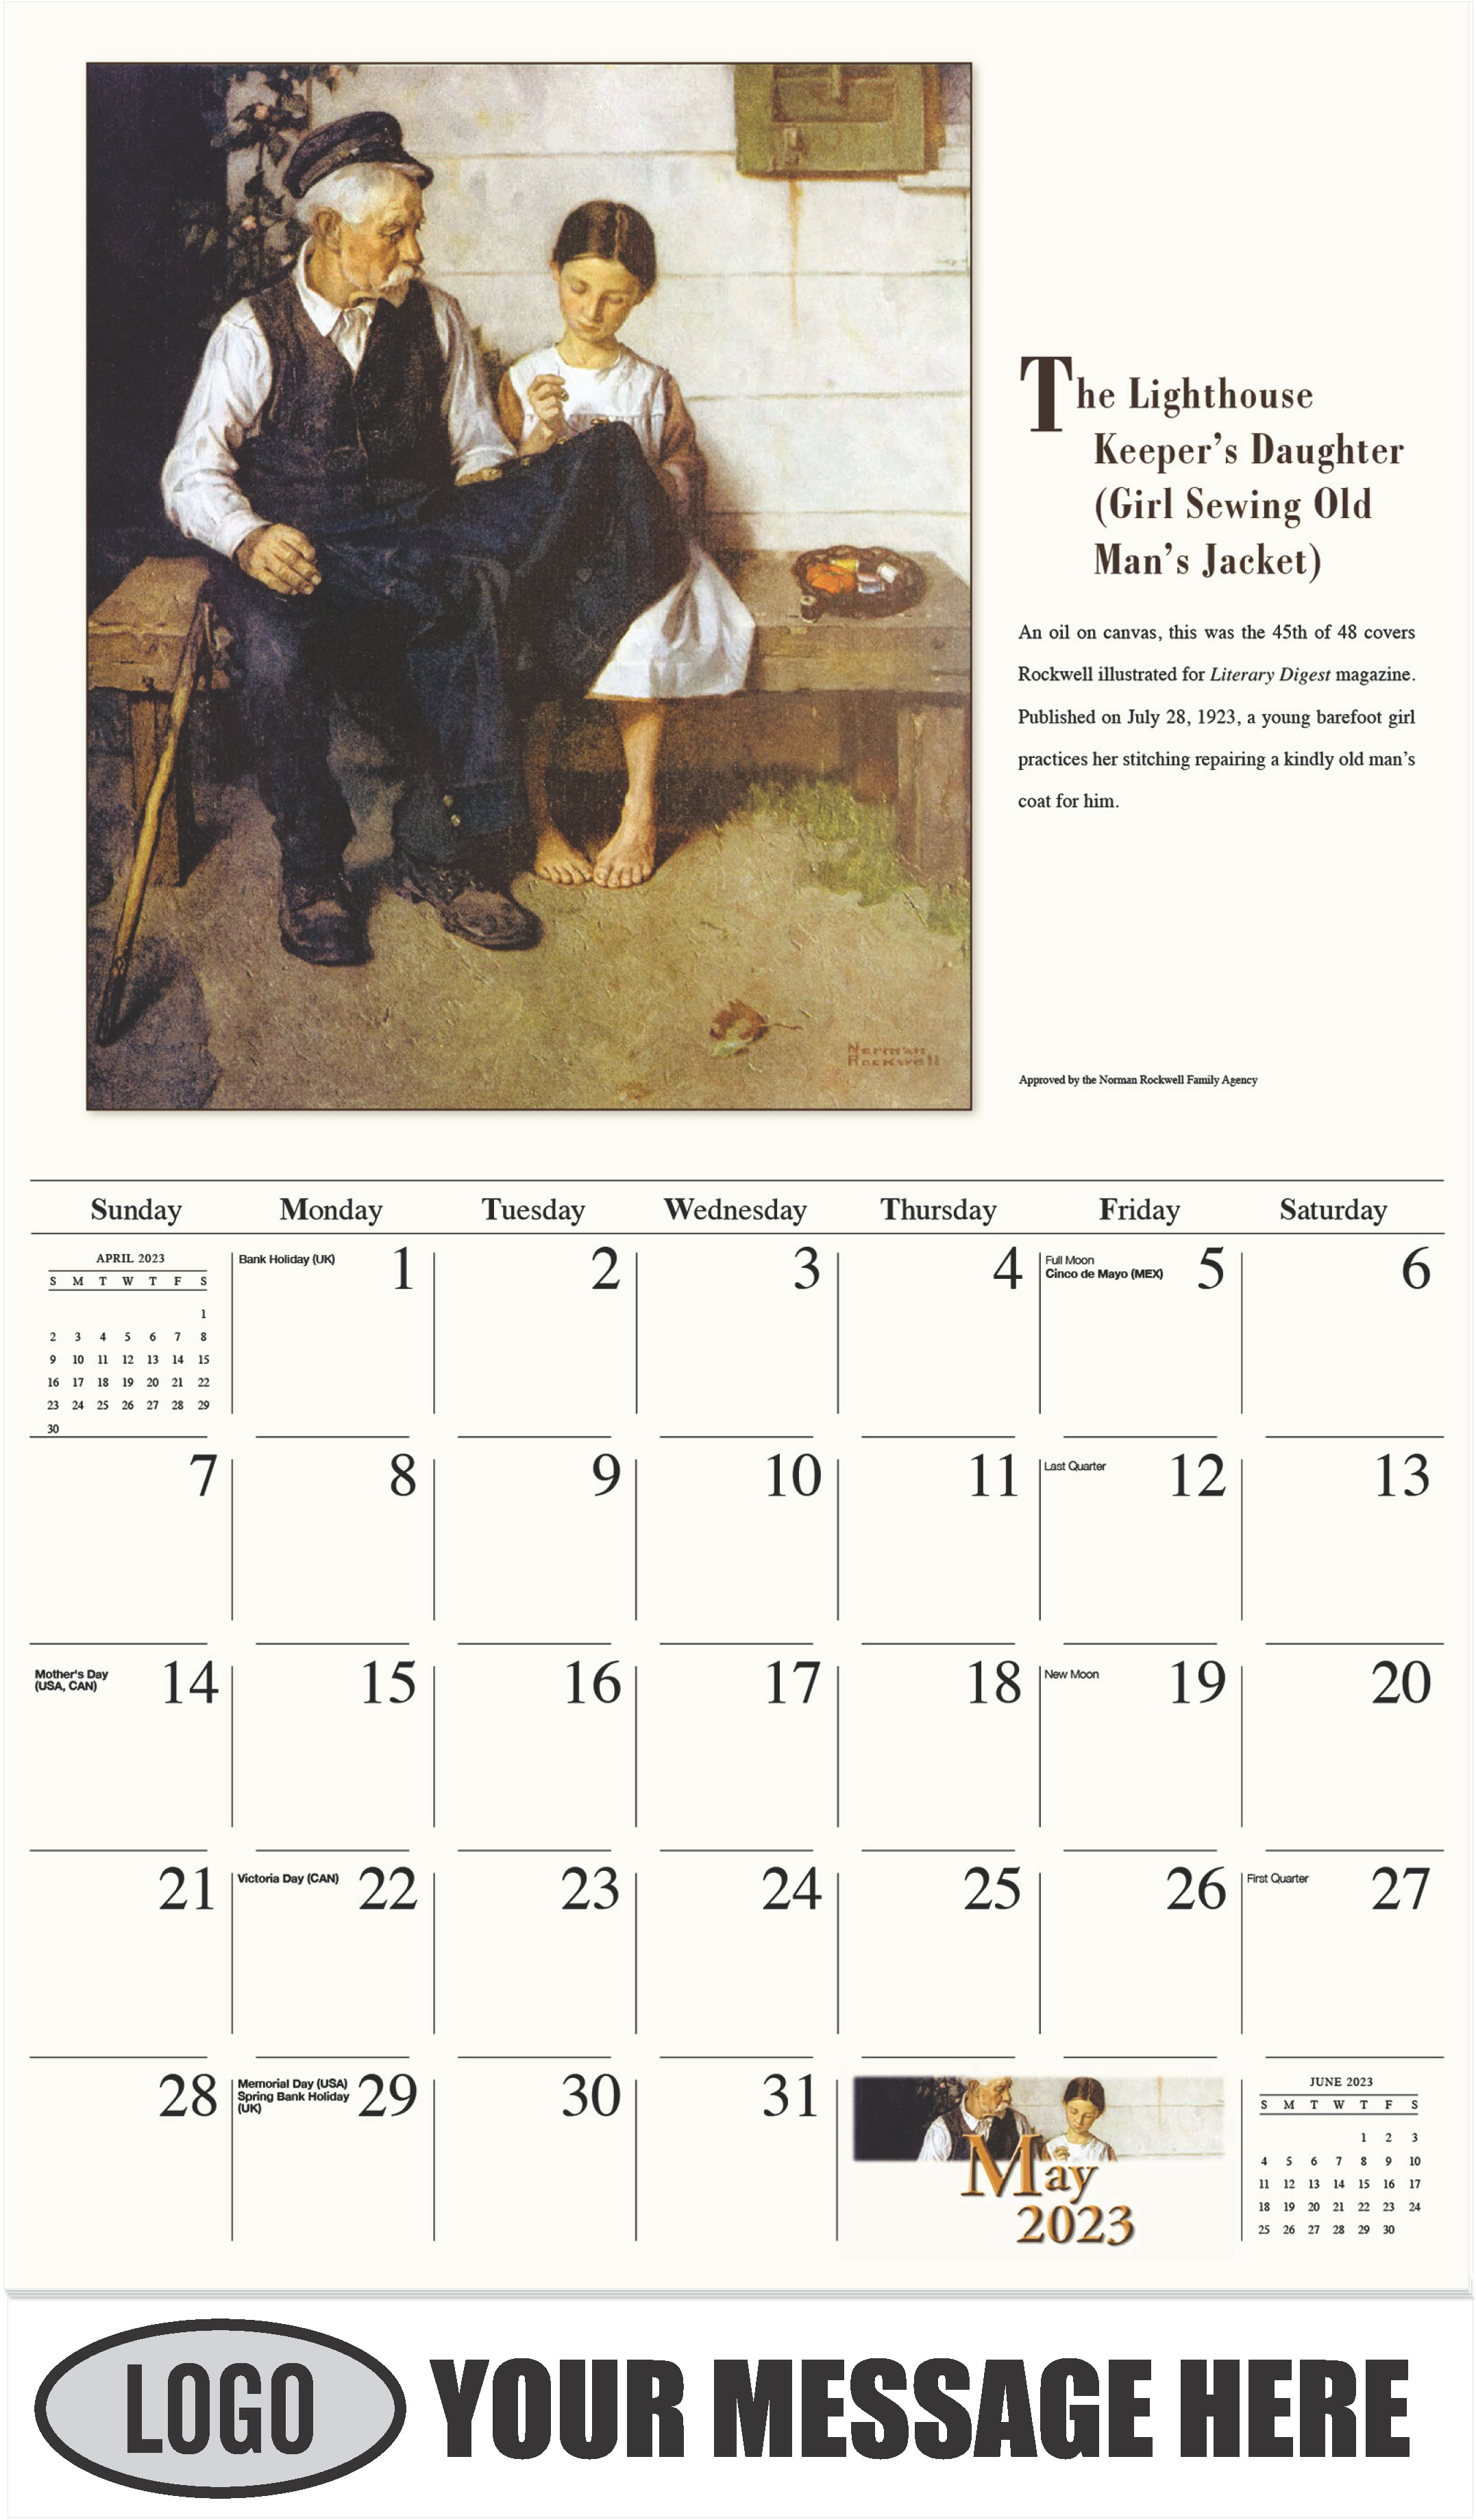 The Lighthouse Keeper’s Daughter (Girl Sewing Old Man’s Jacket) - May - Norman Rockwell - Memorable Images 2023 Promotional Calendar